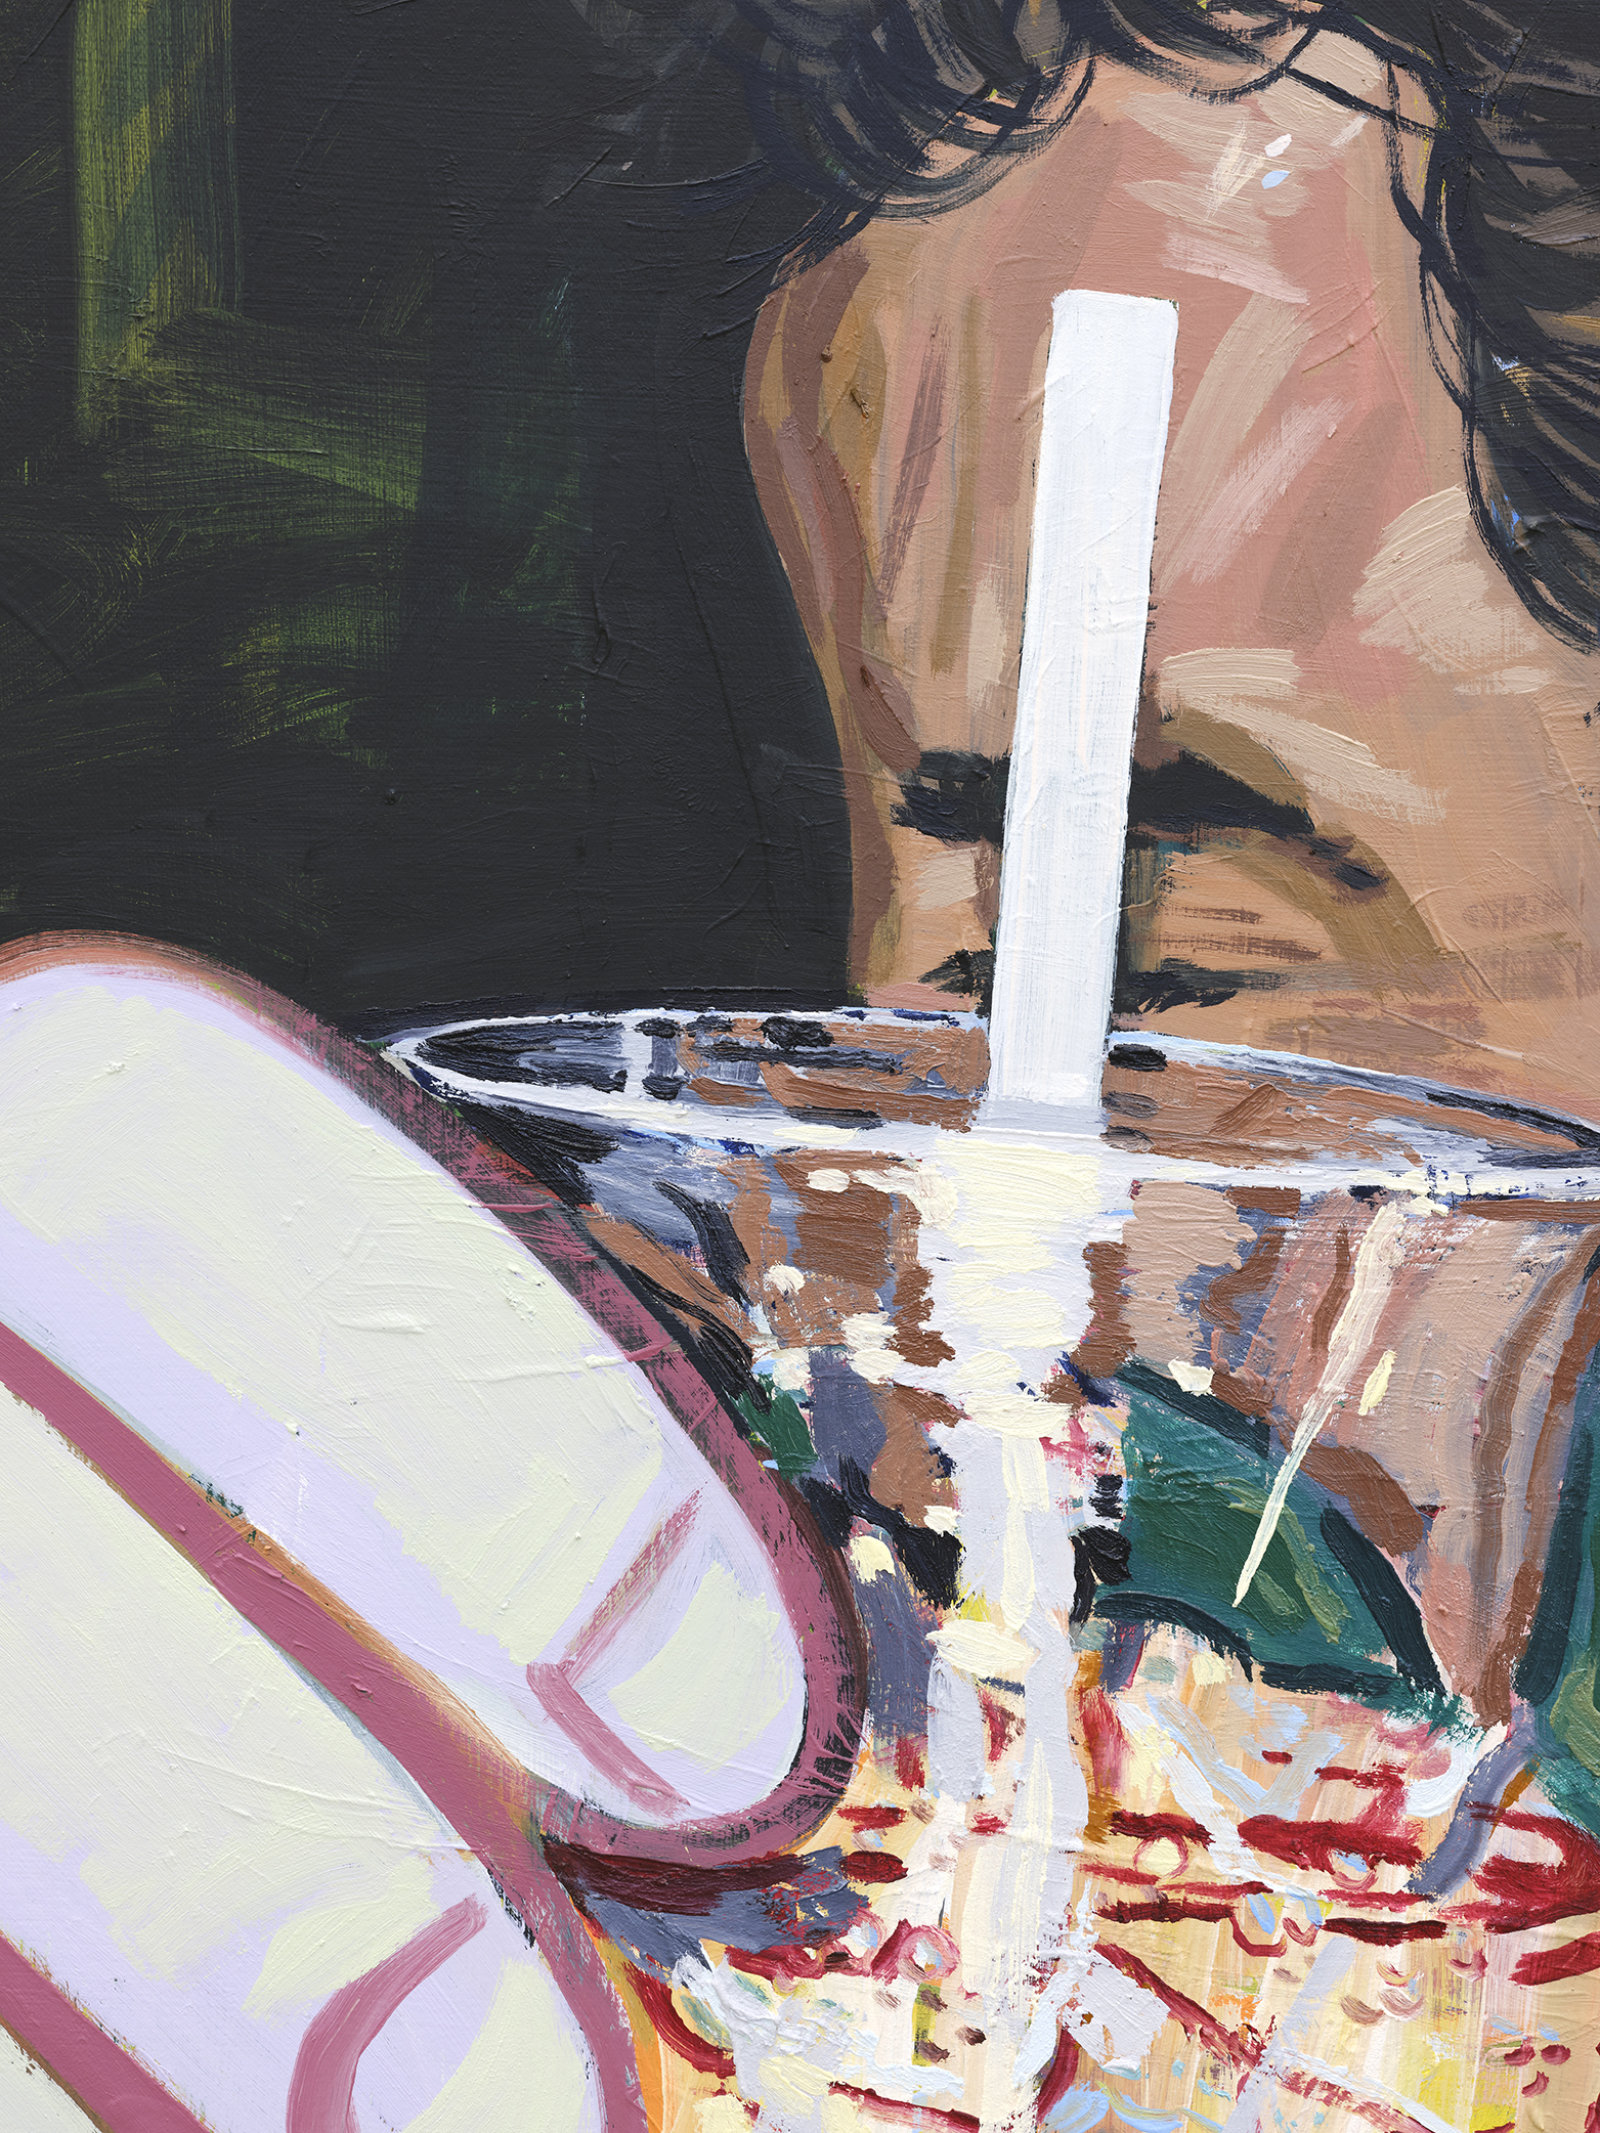 Damian Moppett, Hand and Head (detail), 2020, oil on canvas, 42 x 50 in. (107 x 126 cm)